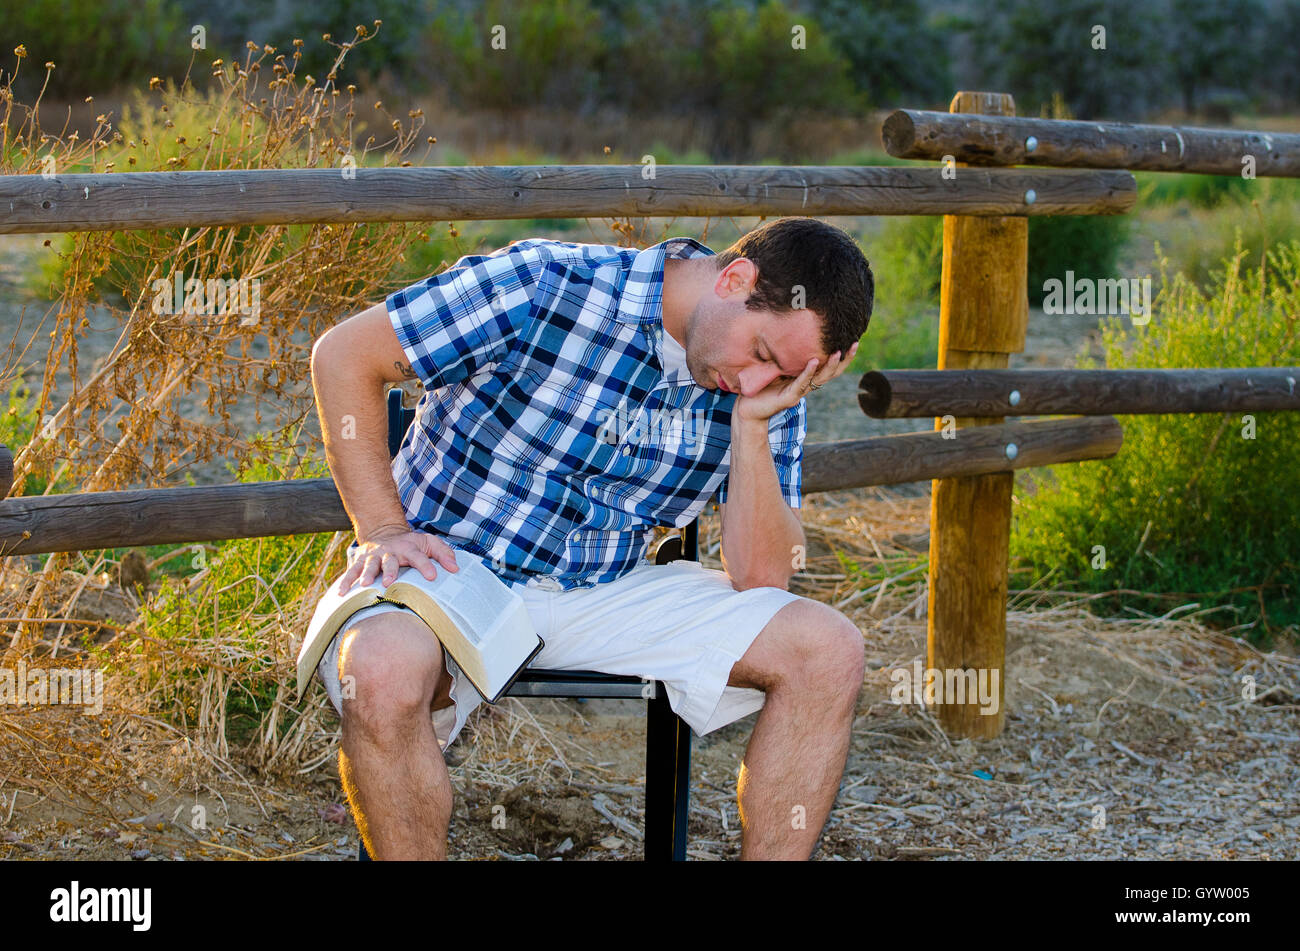 Alone time outdoors man praying with his head in his hand and Bible in his lap. Stock Photo